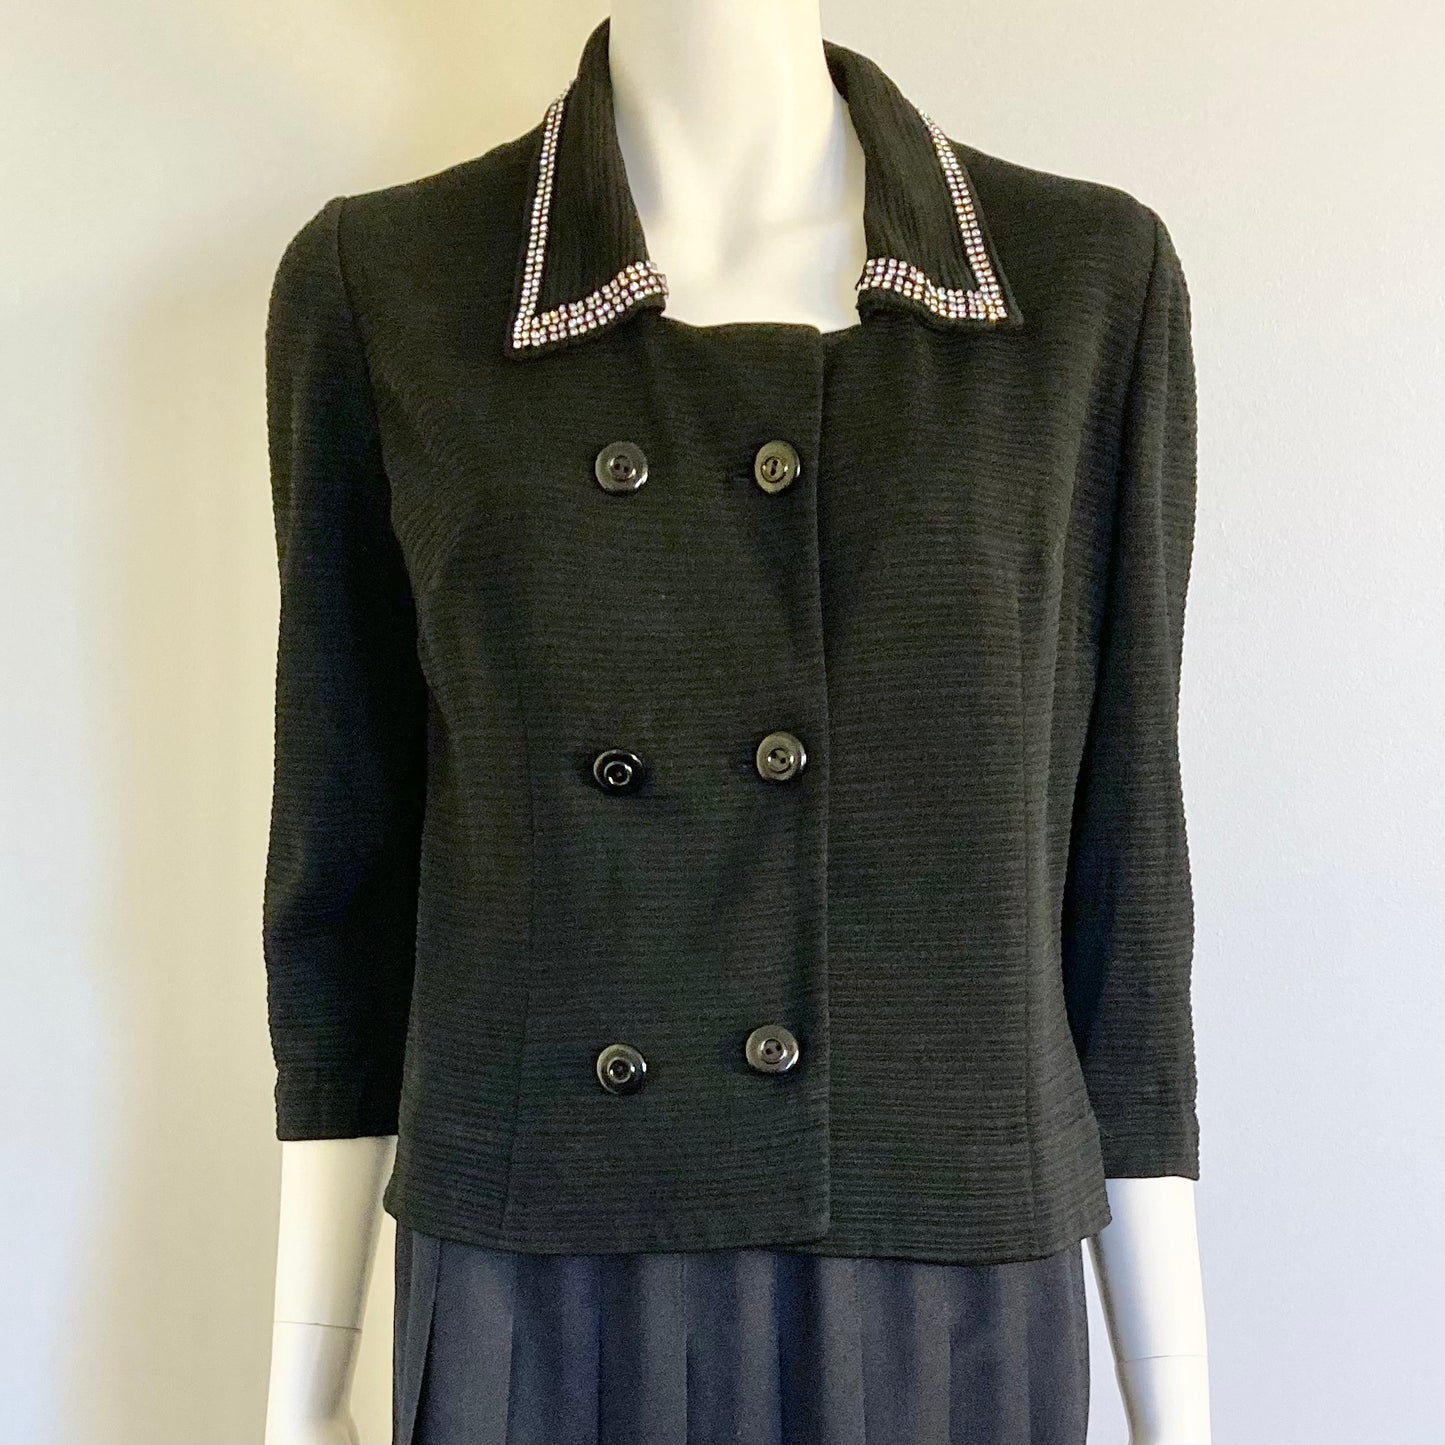 1960's Rhinestone Trimmed Knit Jacket by Miss Sun Valley, Size M